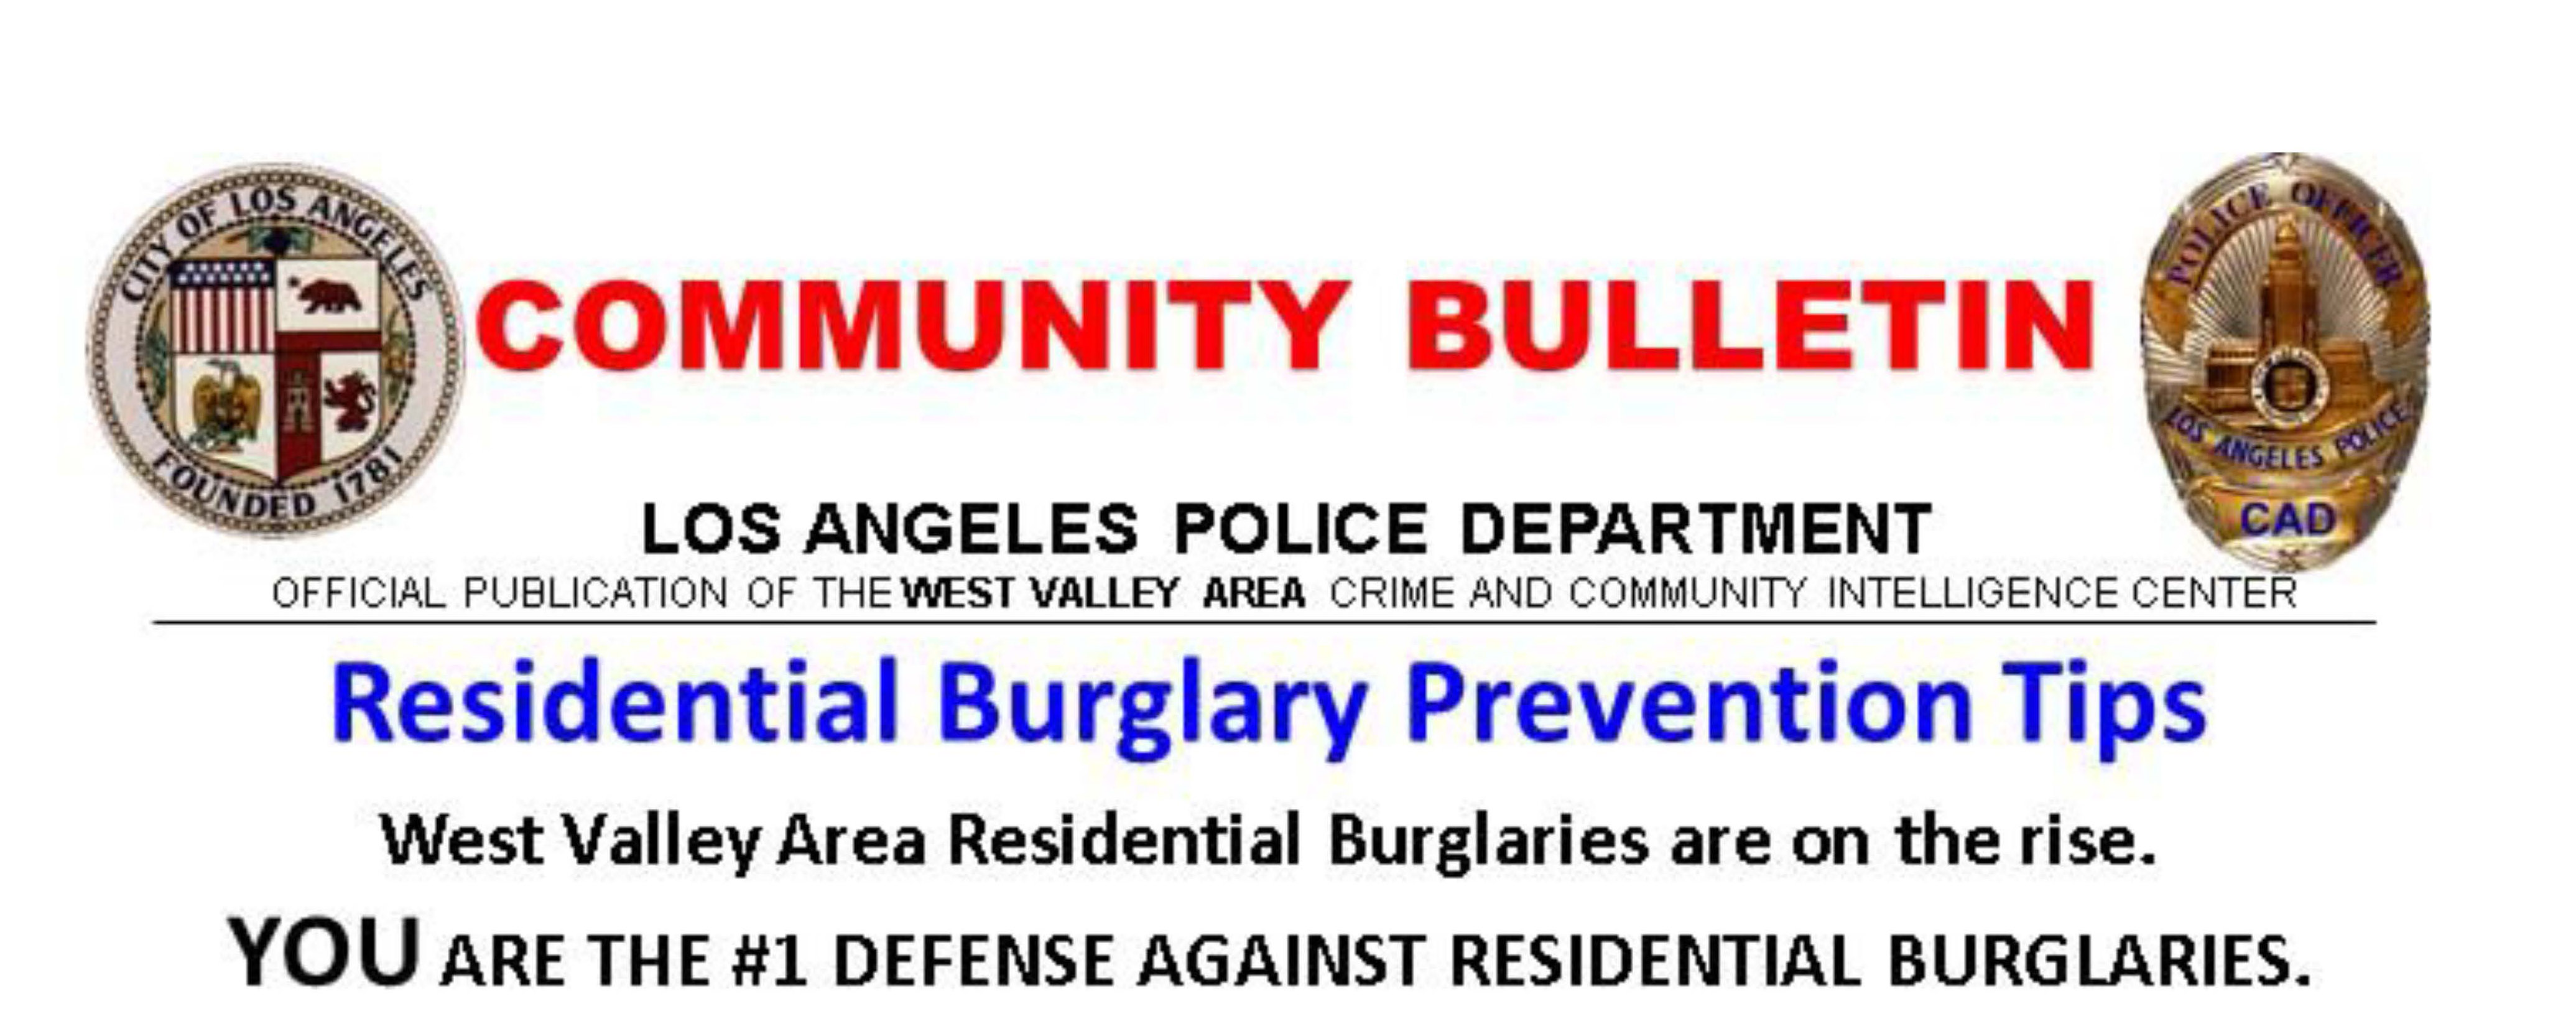 Burglaries are up - safeguard your home and posessions!